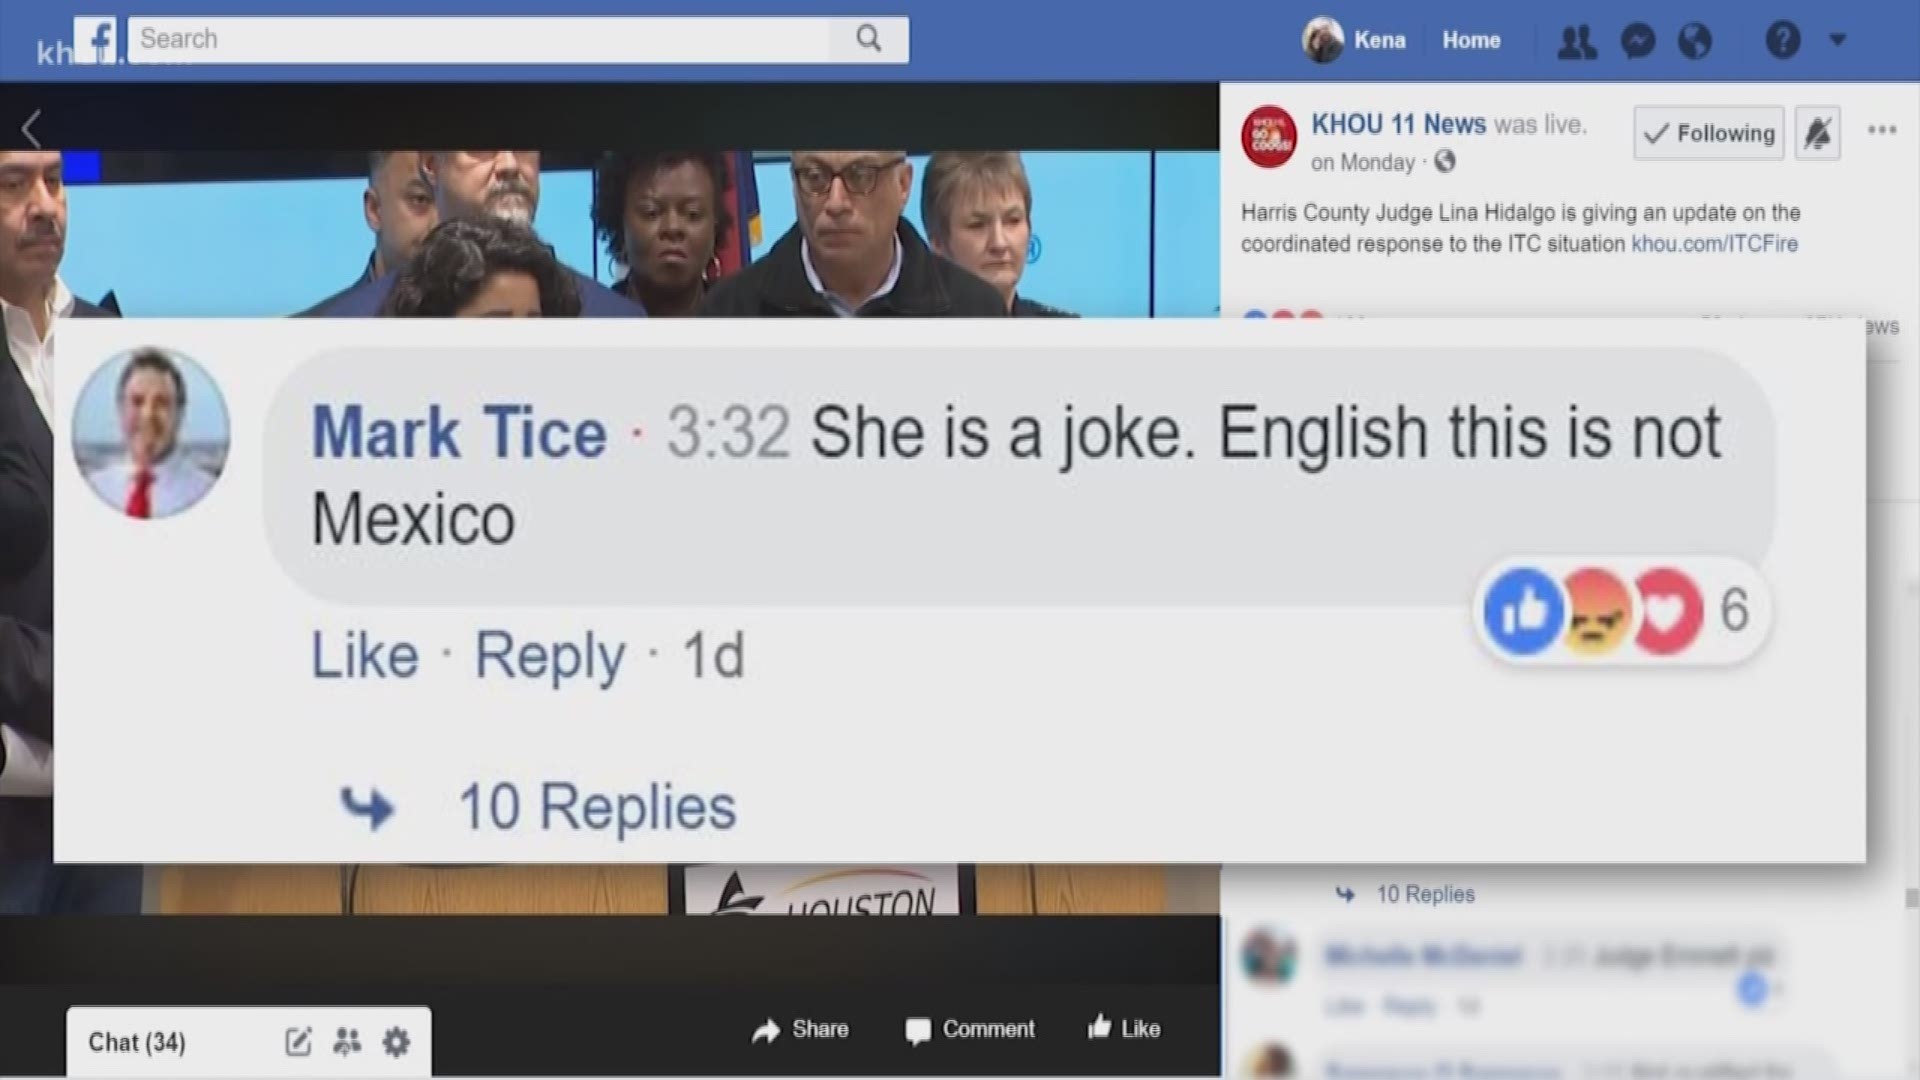 A Chambers County commissioner is under fire for comments he posted about Judge Lina Hidalgo on a KHOU 11 live stream on Monday.